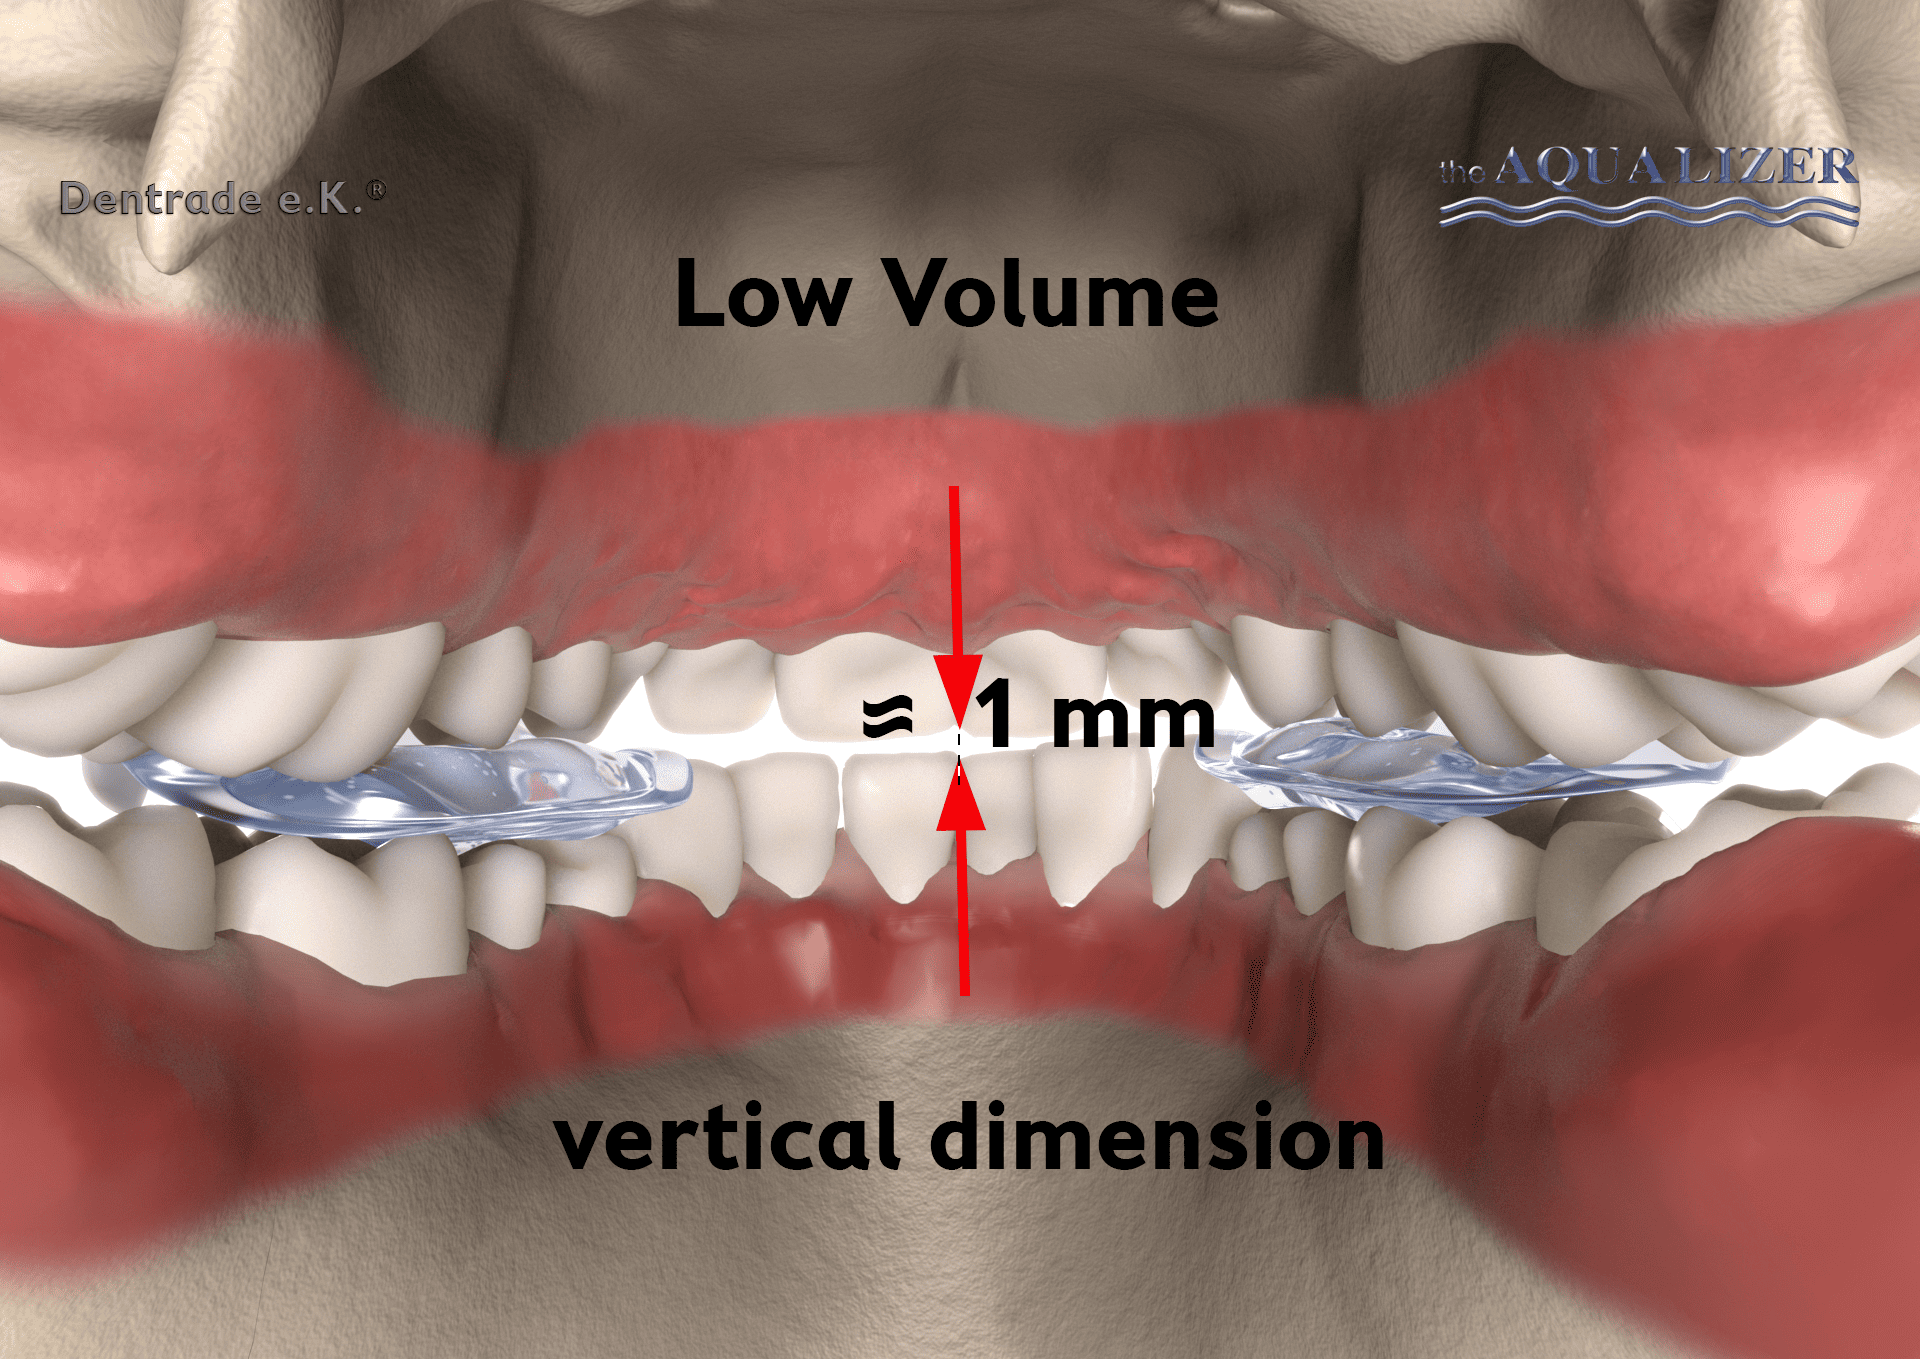 Illustration of a bite cavity with two pads on the molars, which provide a distance of about 1 mm